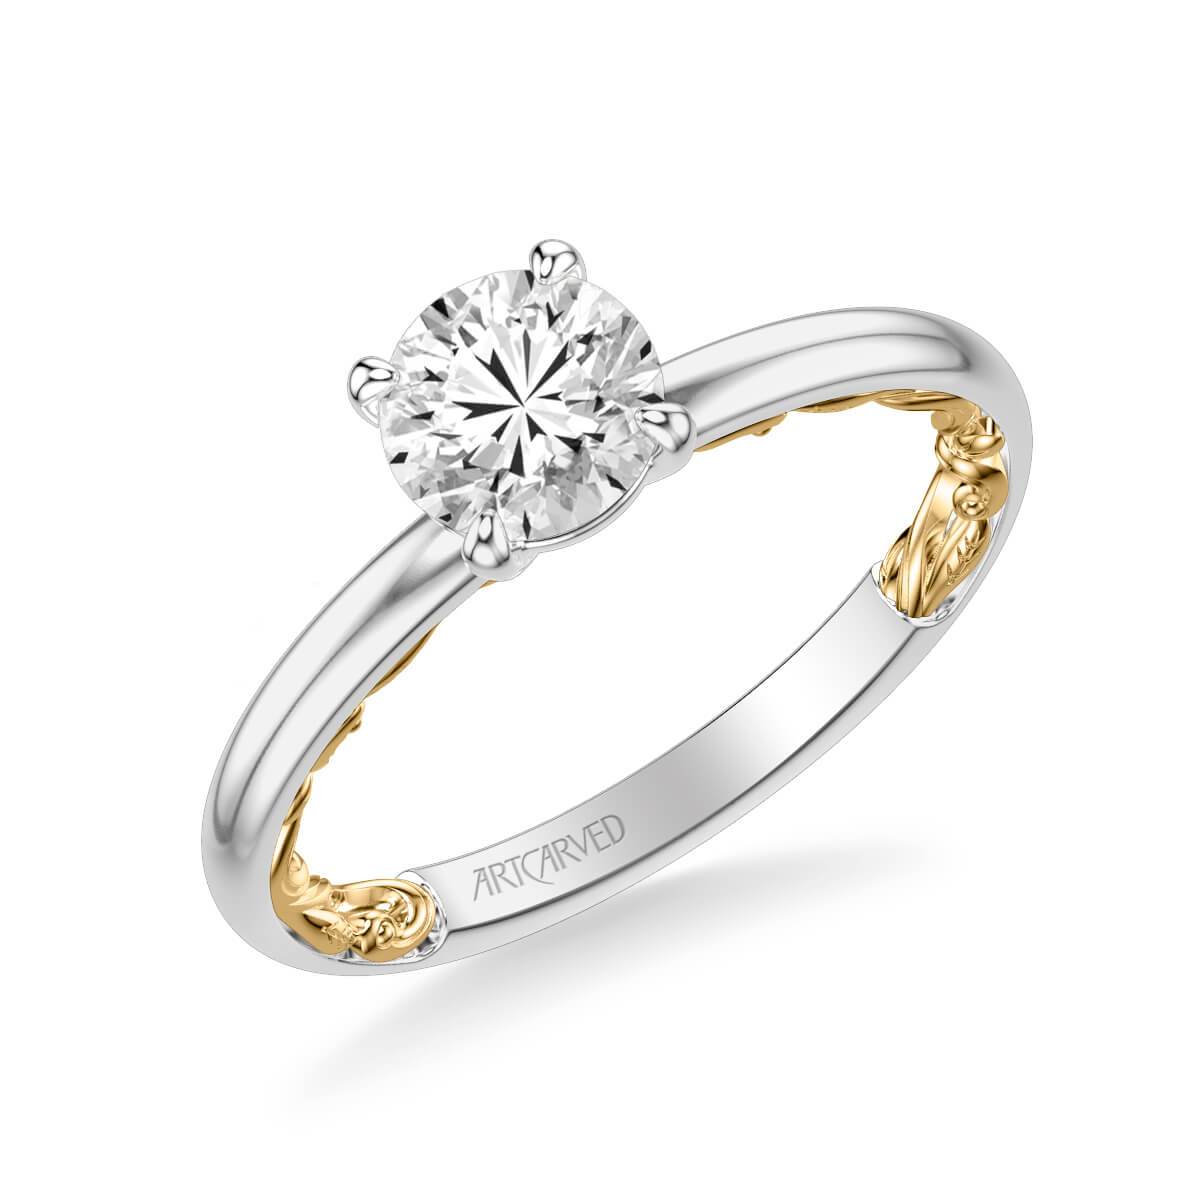 Beryl Lyric Collection Classic Solitaire Diamond Engagement Ring